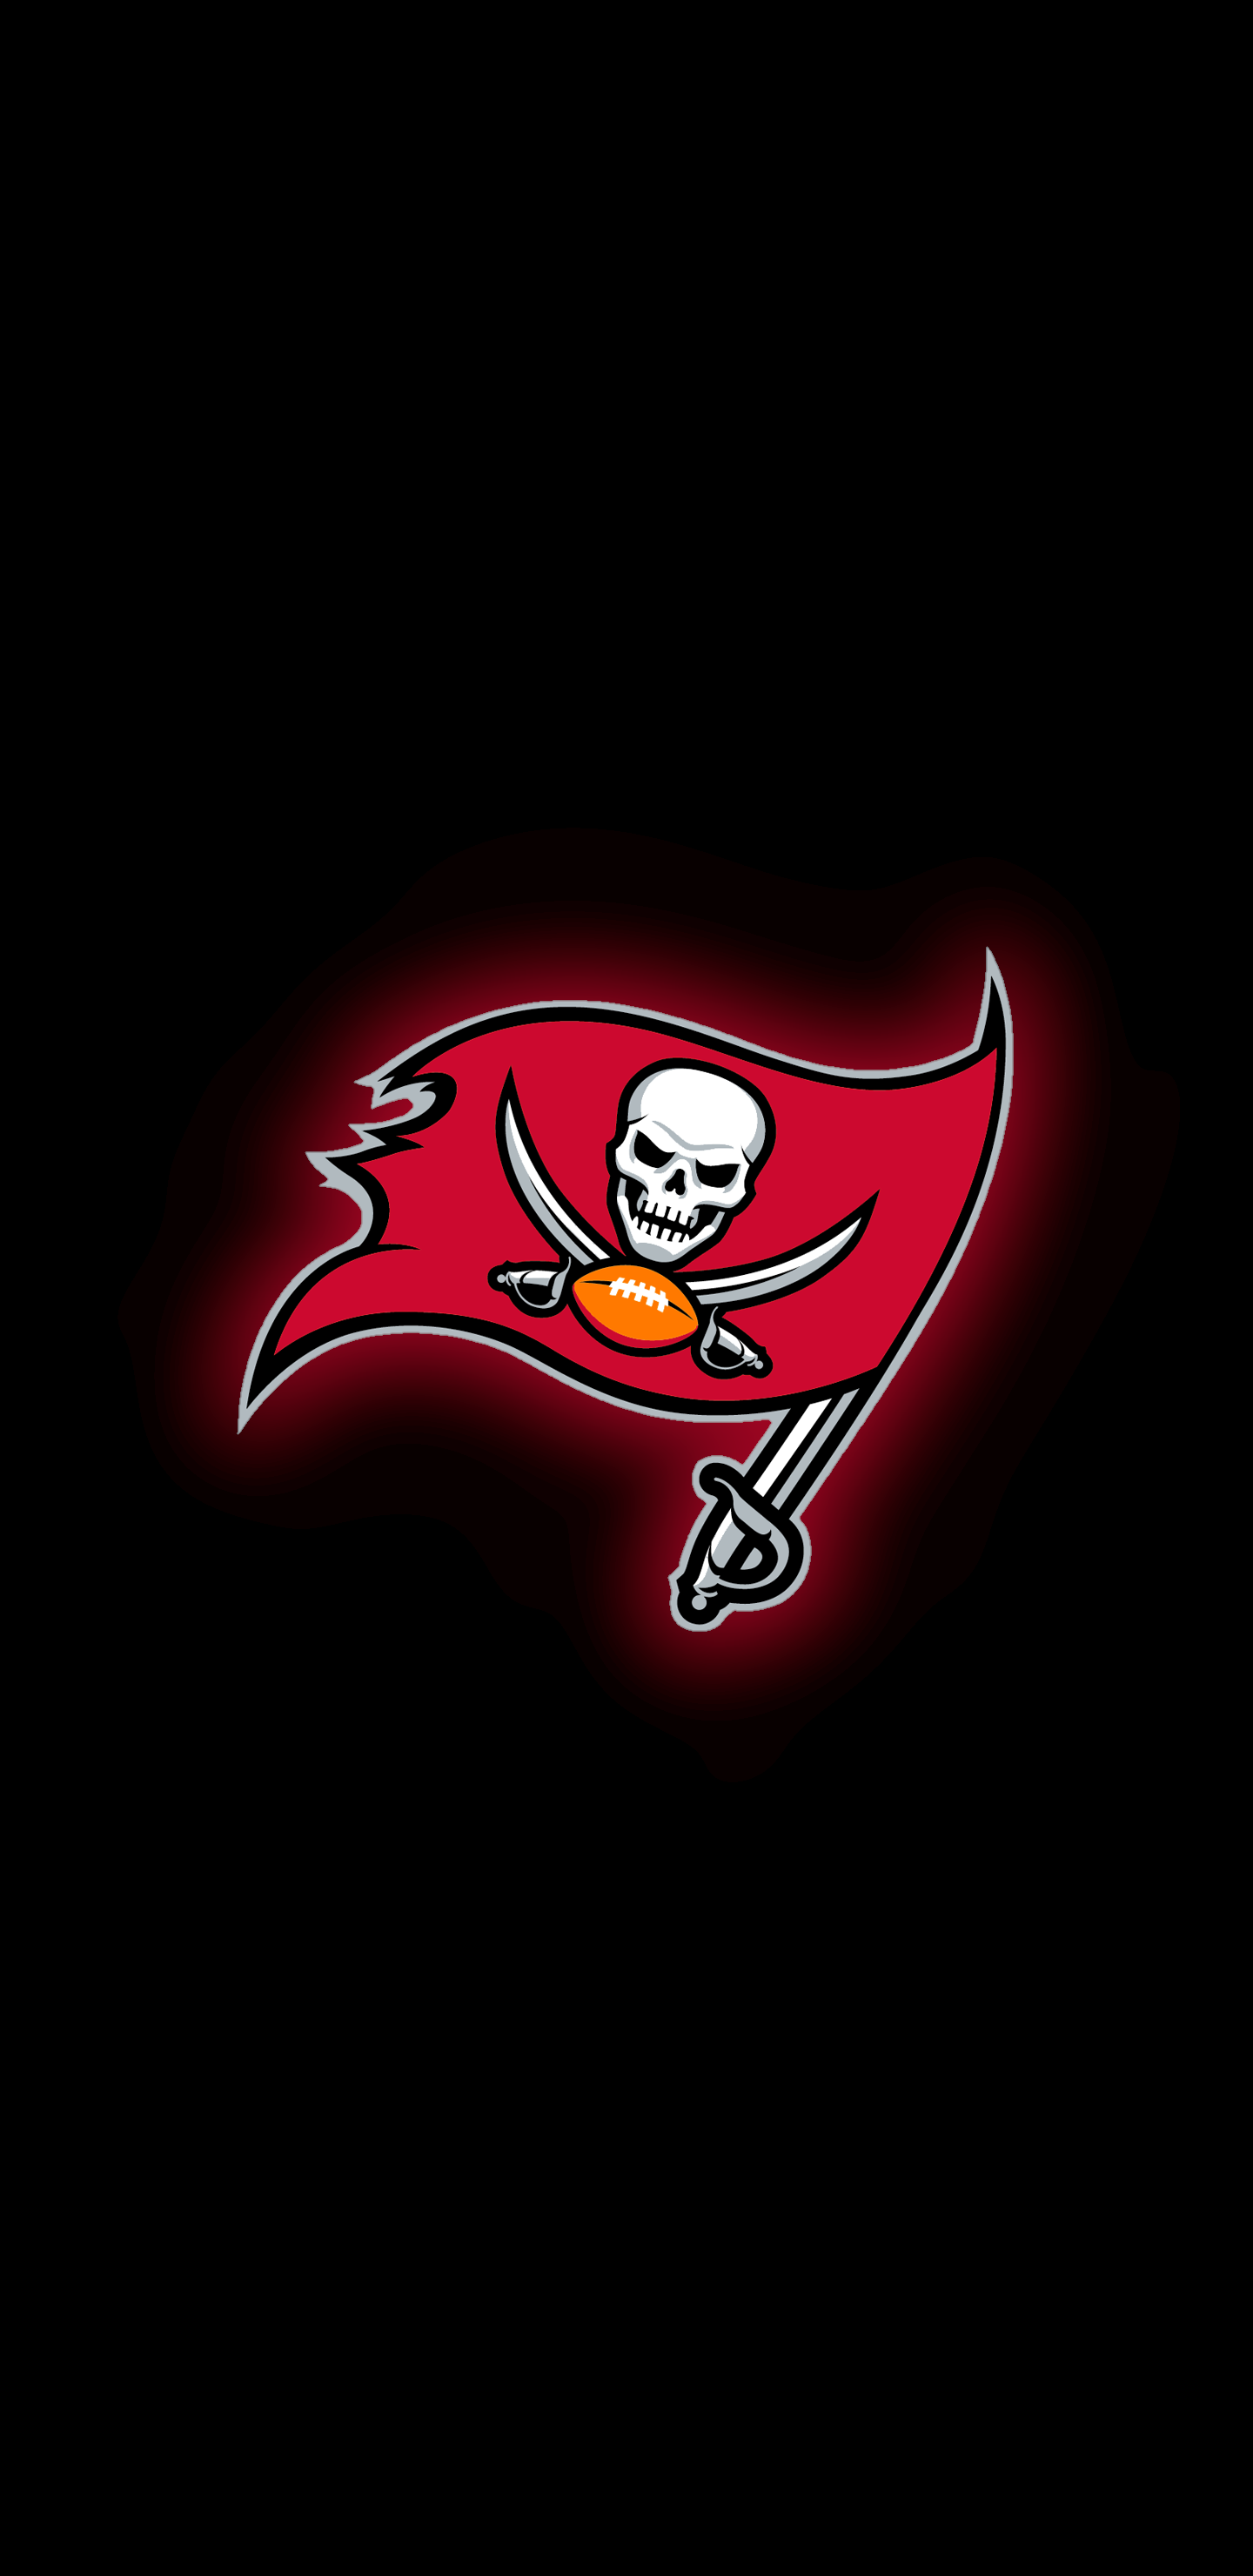 I'm making an amoled wallpaper for every NFL team! 8 down!